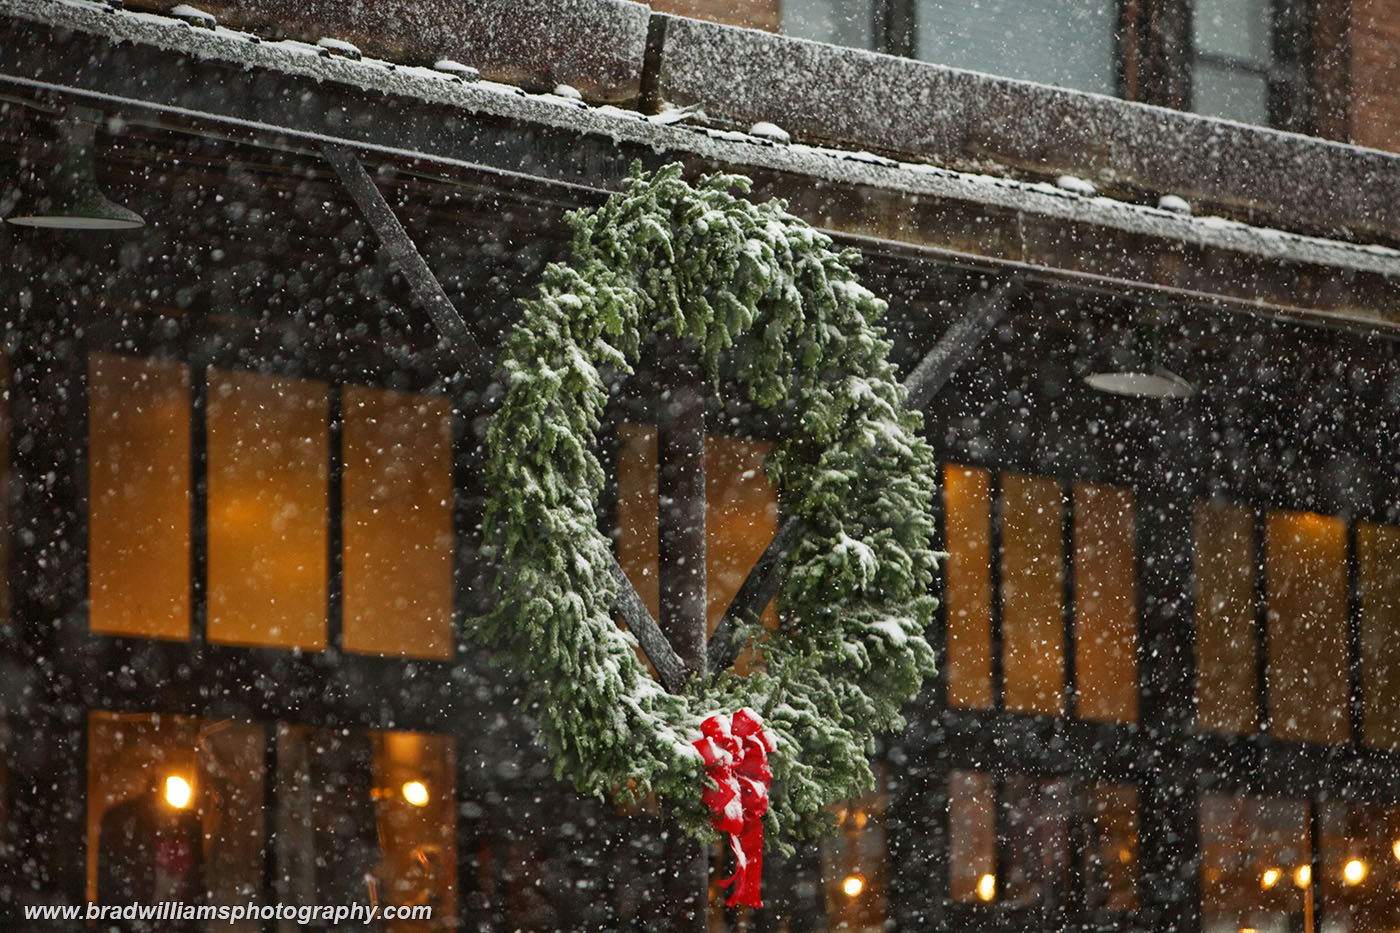 A fresh snowfall in Omaha's Historic Old Market District.